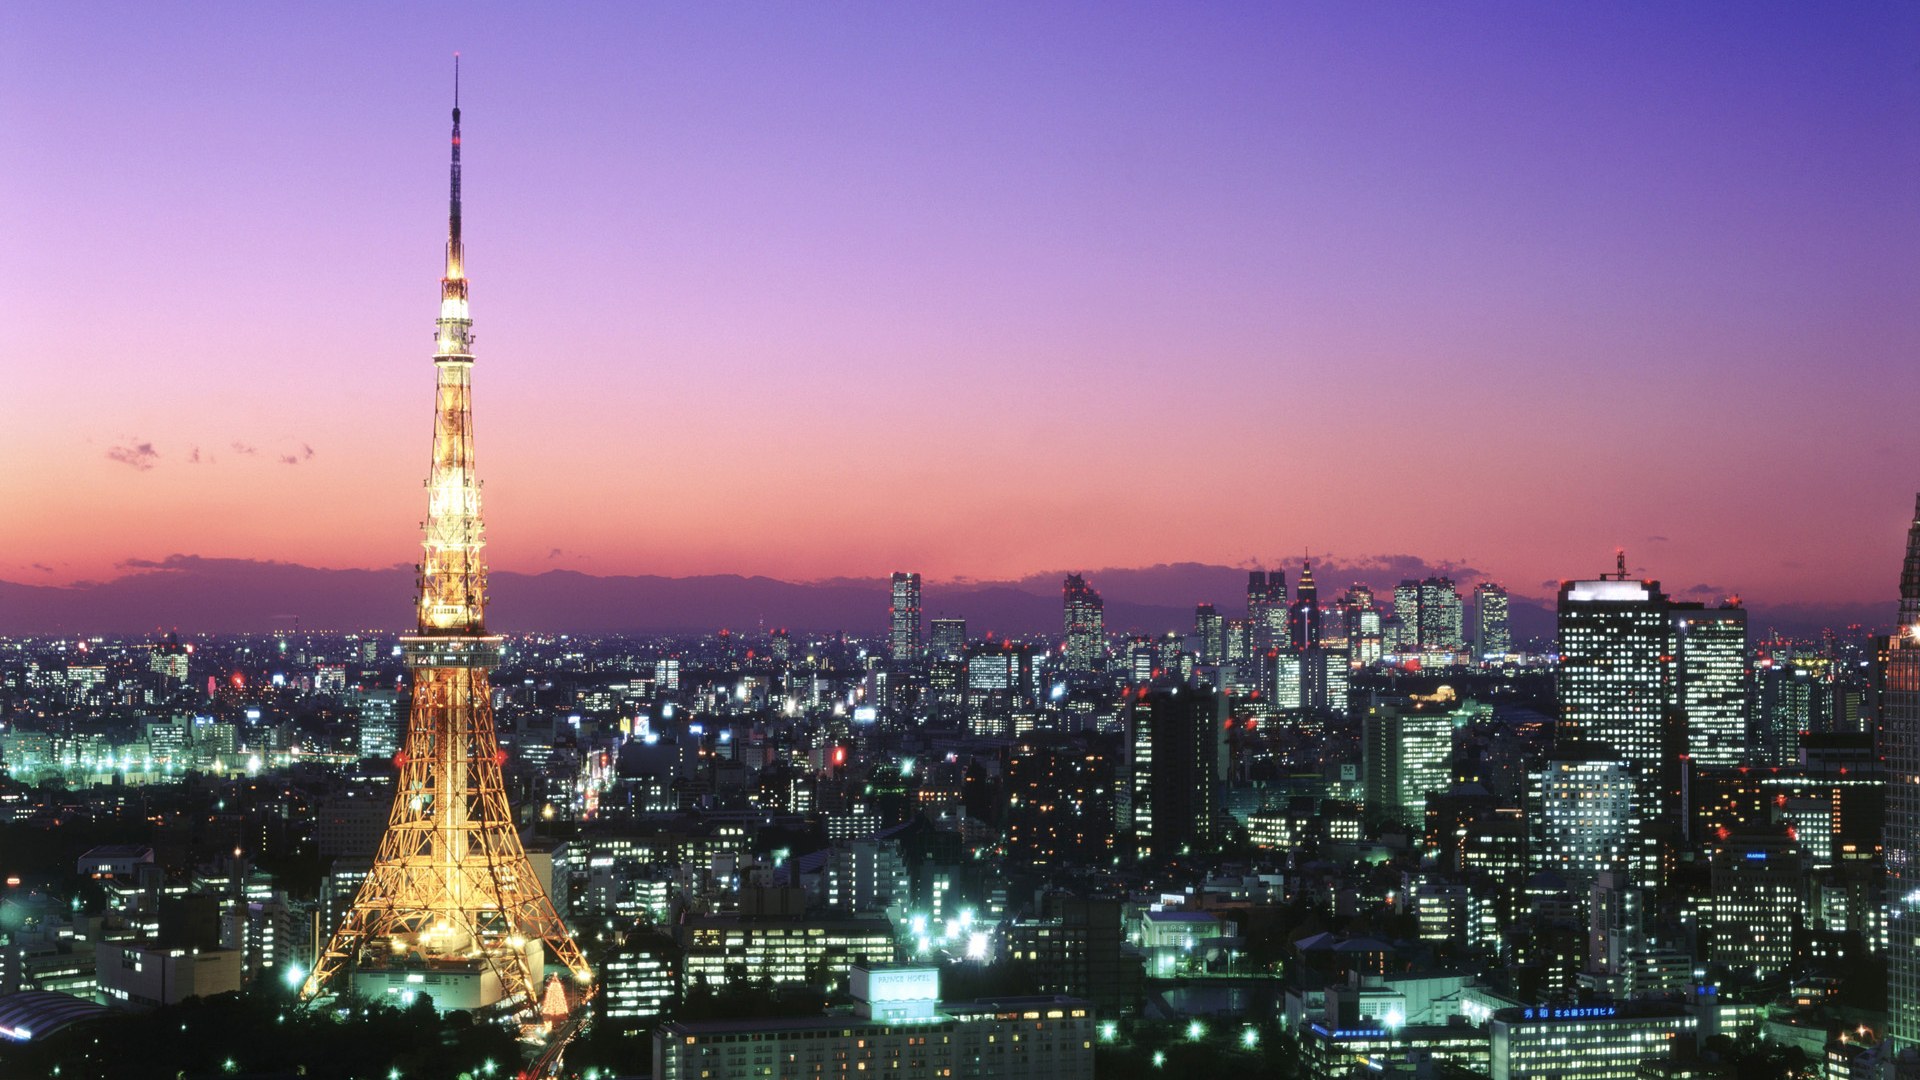 tokyo tower brings back some